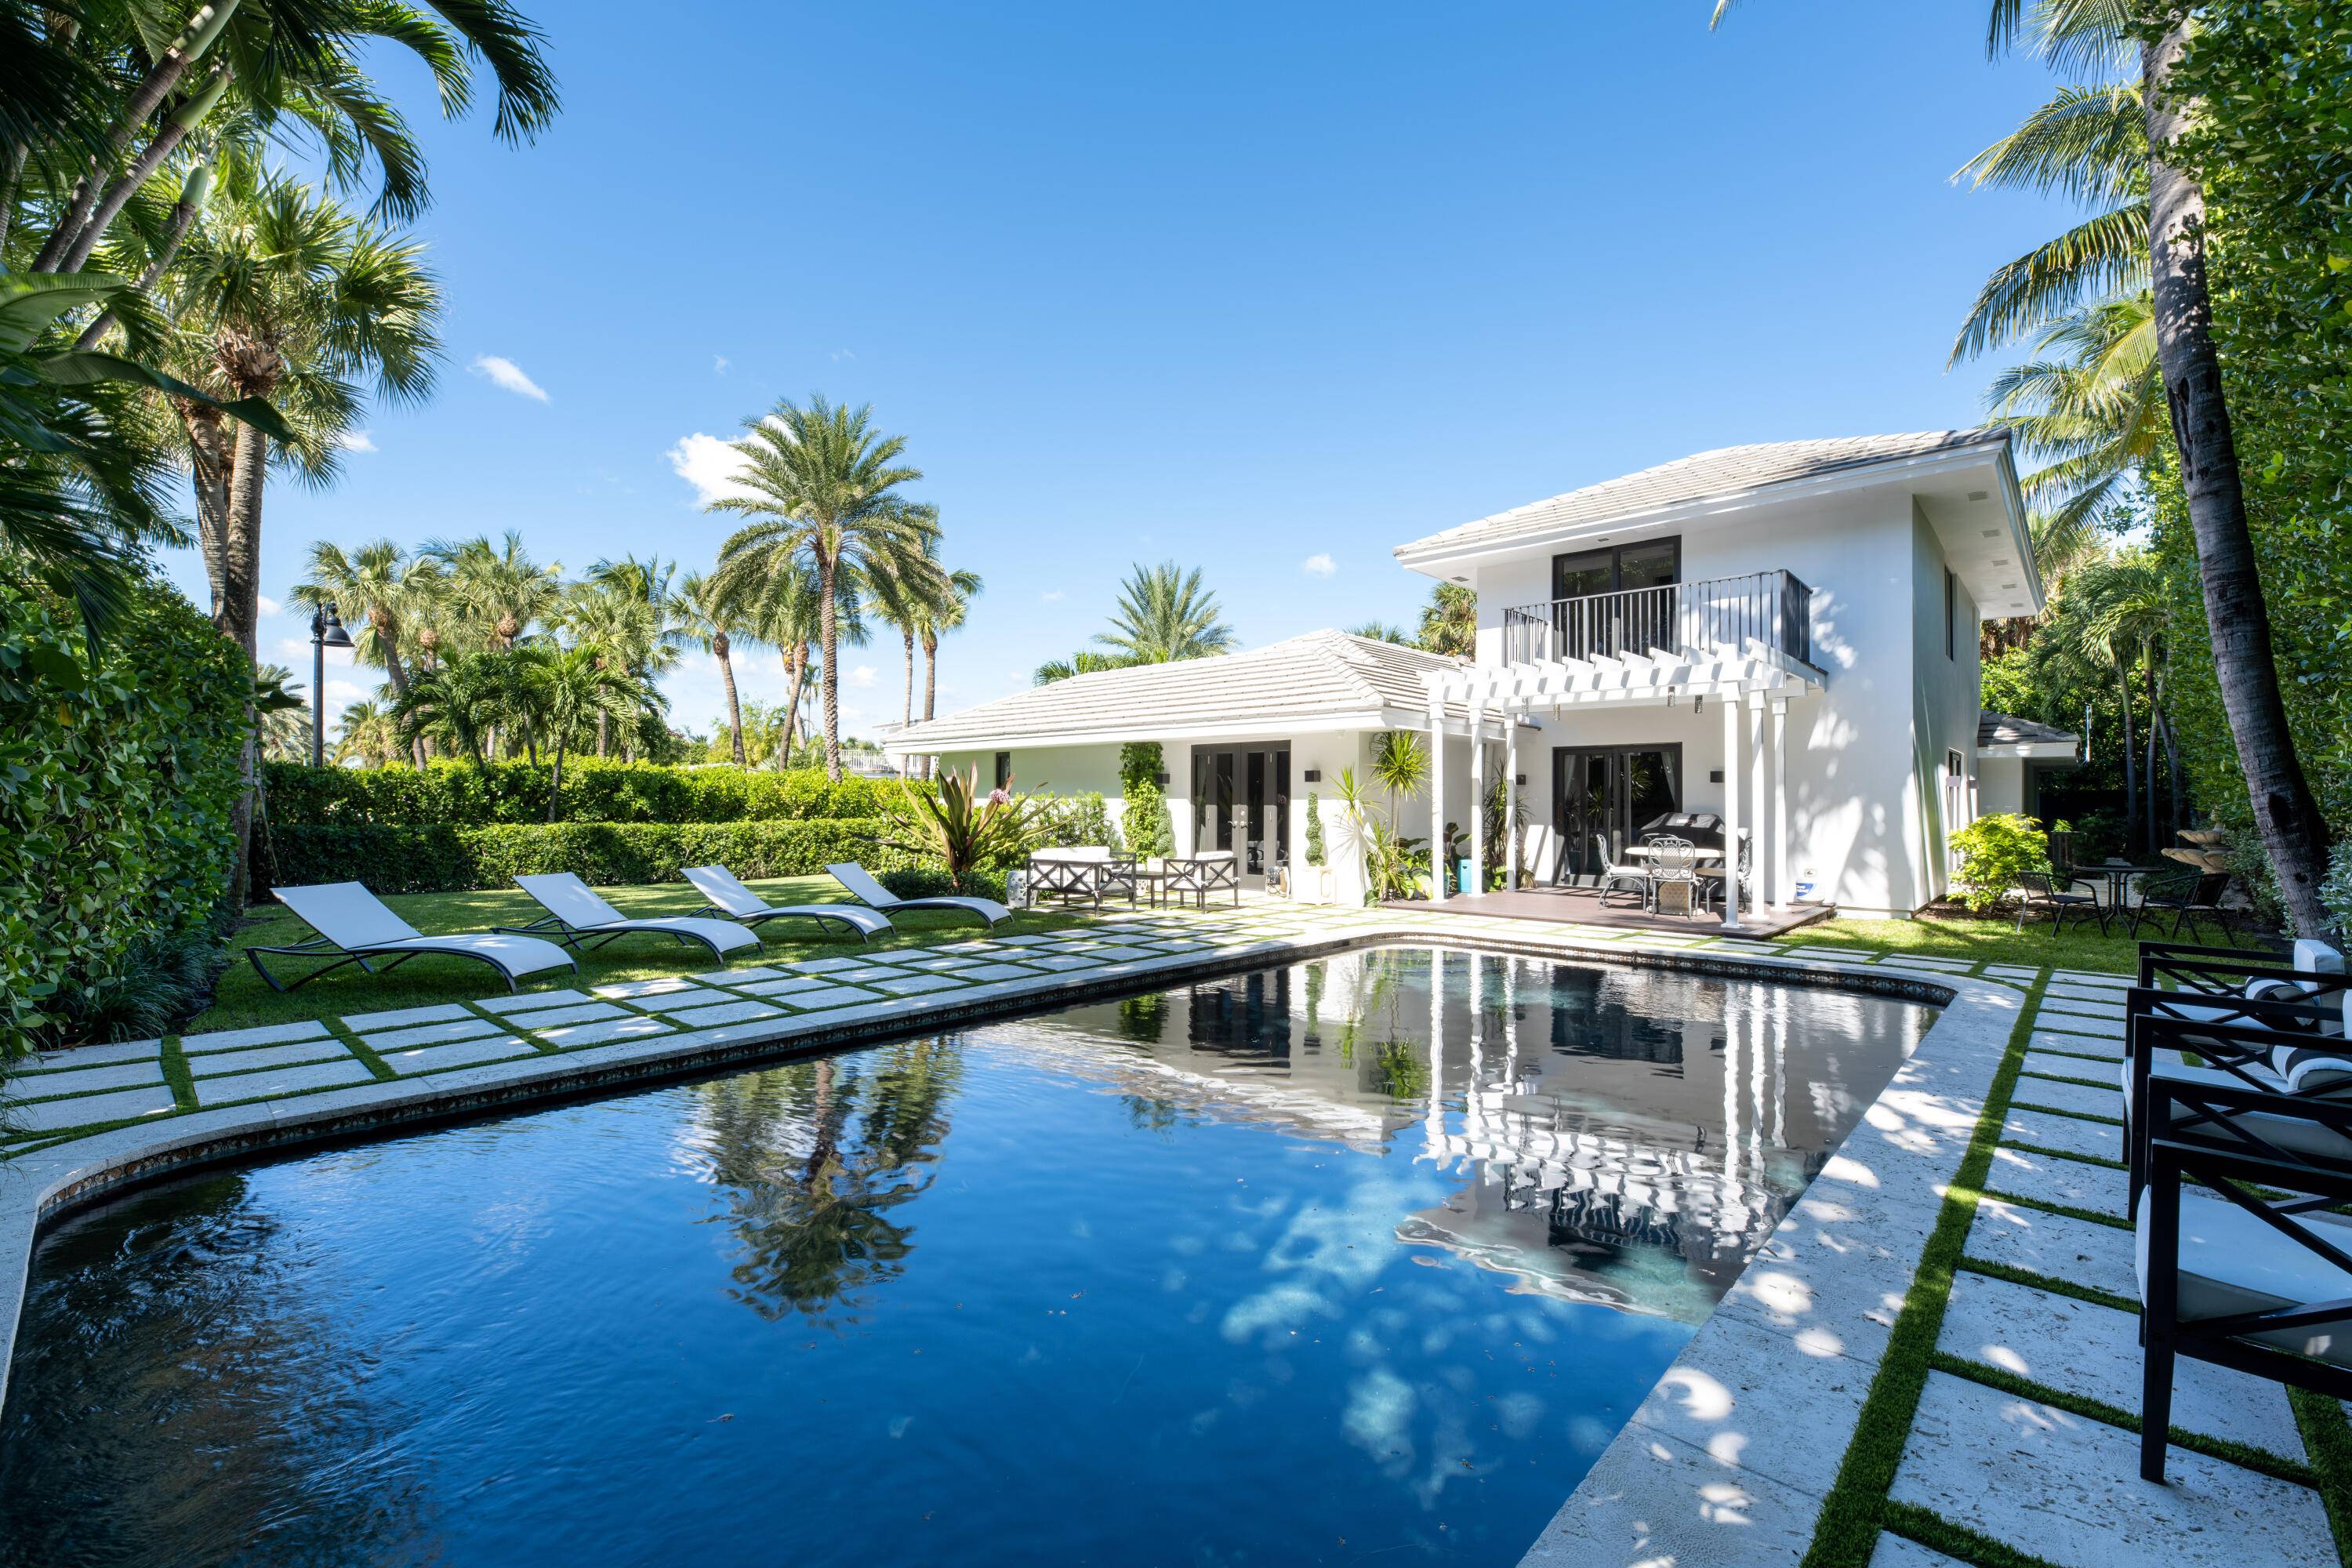 Ideally located on a quiet north end street in Palm Beach, this beautifully renovated home features 3, 803 total square feet with 4 bedrooms, and 4 and one half baths.